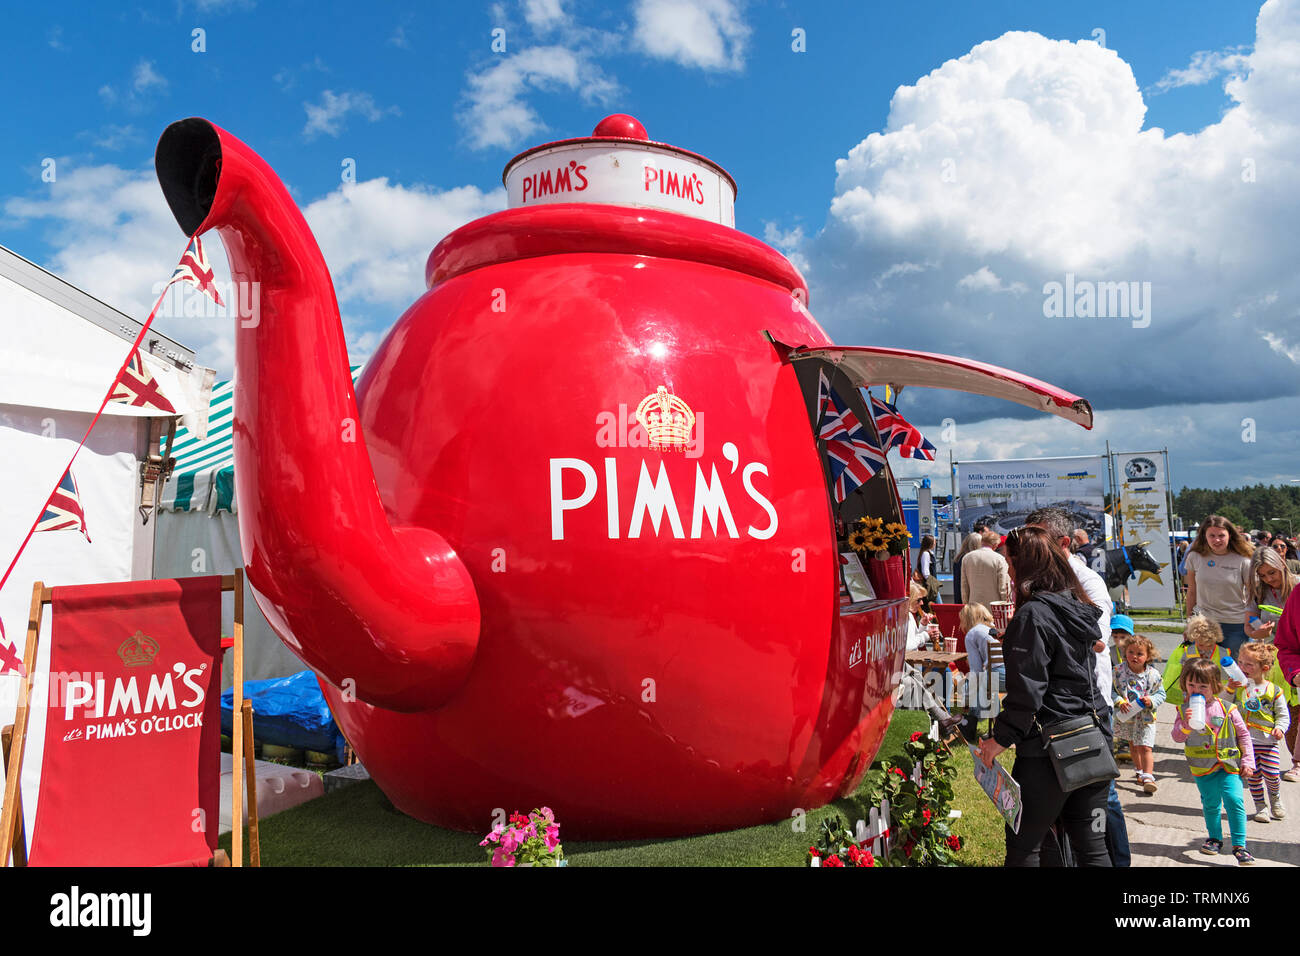 A Pimms alcoholic drinks teaptot stall Stock Photo